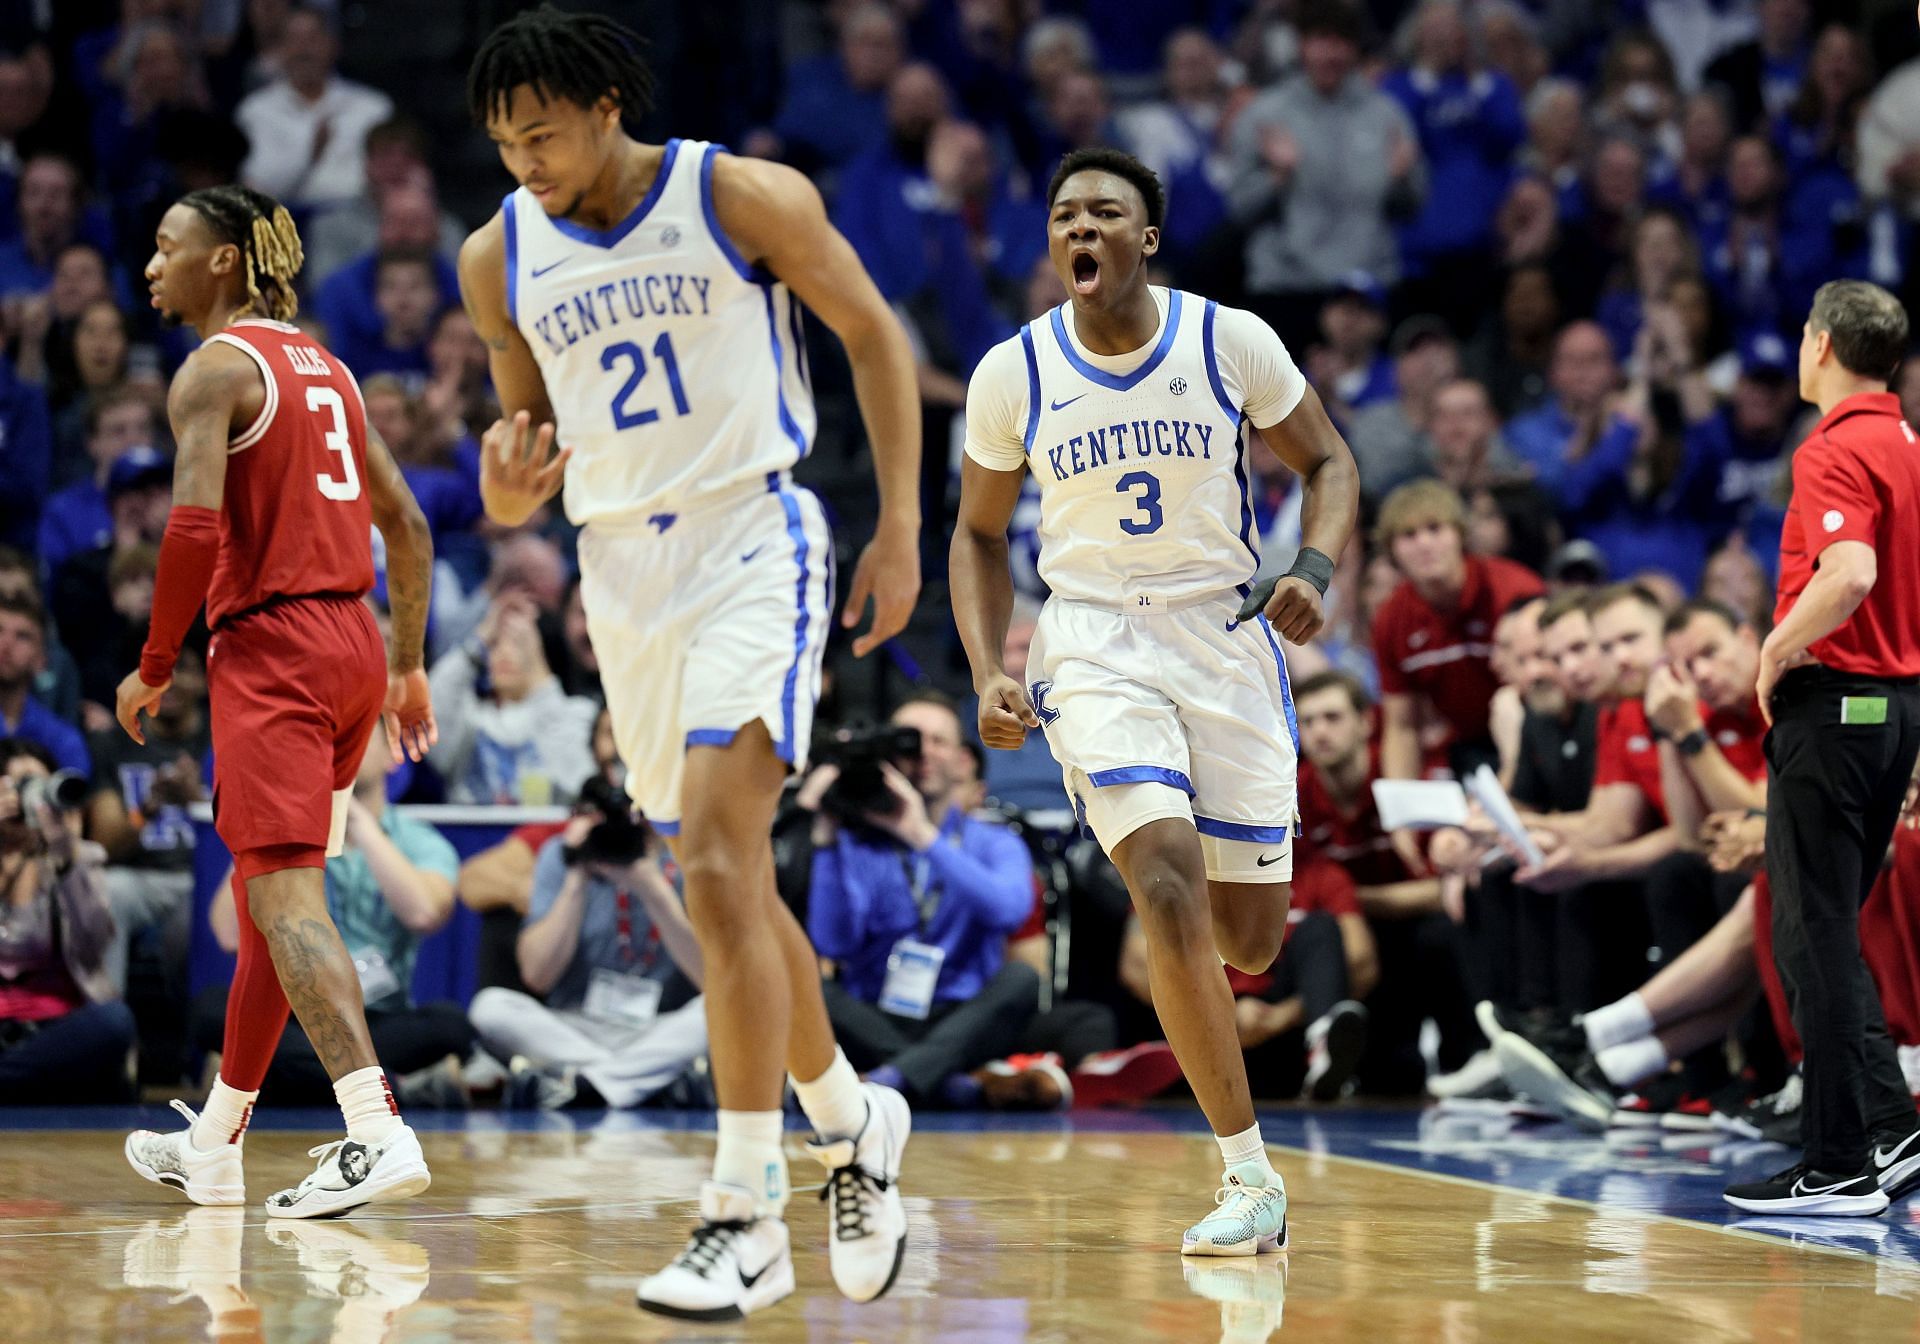 Kentucky holds the most NCAA Tournament appearances, with 60.